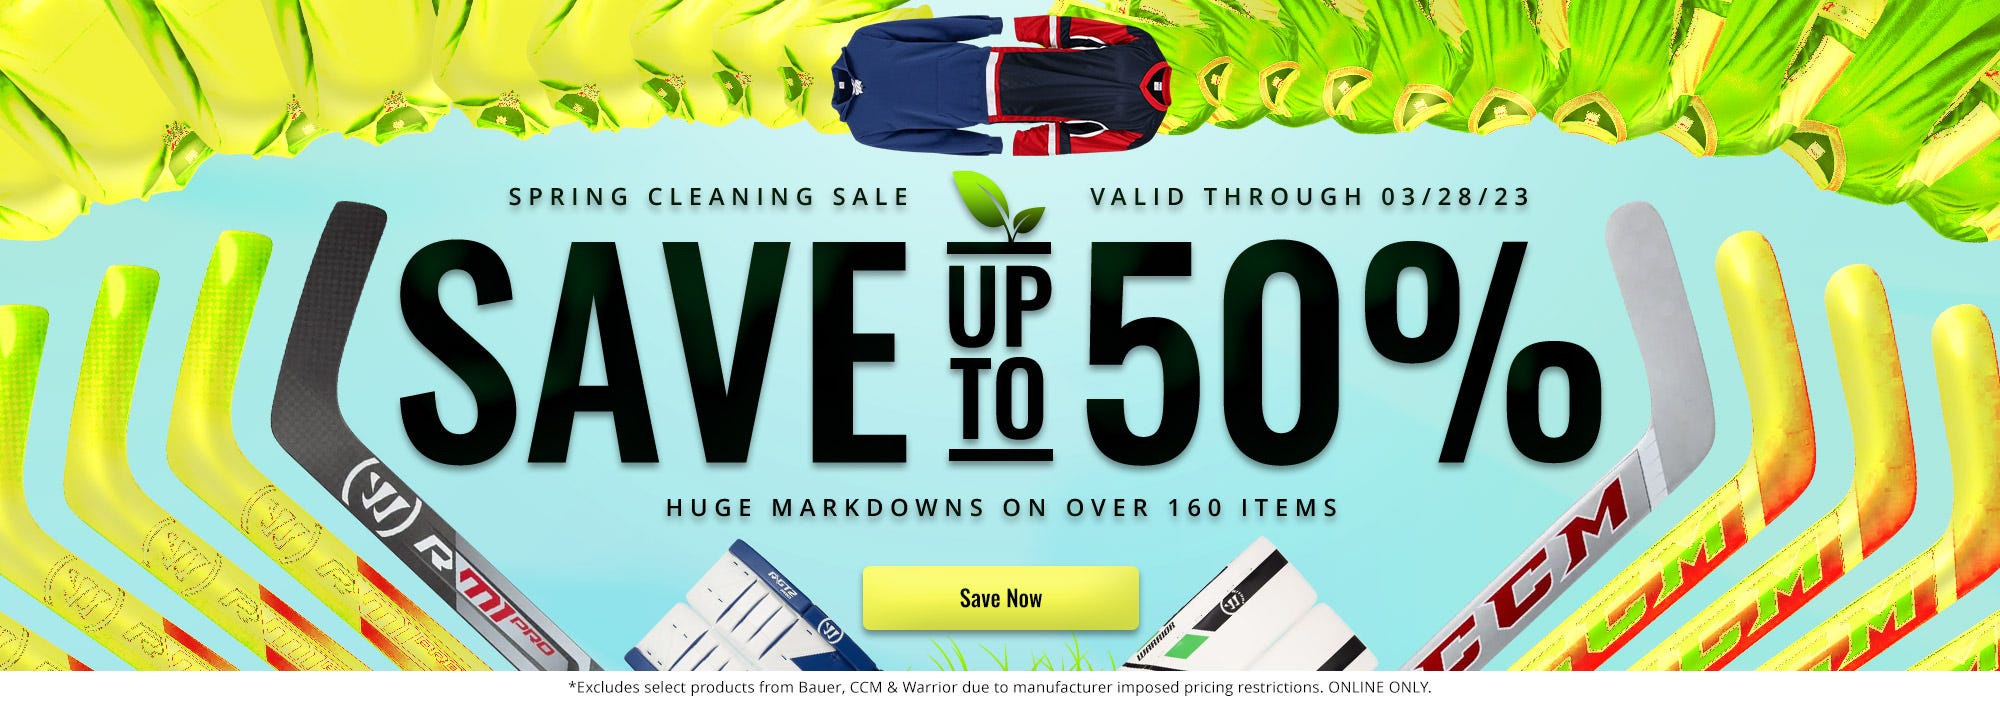 Spring Cleaning Sale: Save up to 50%